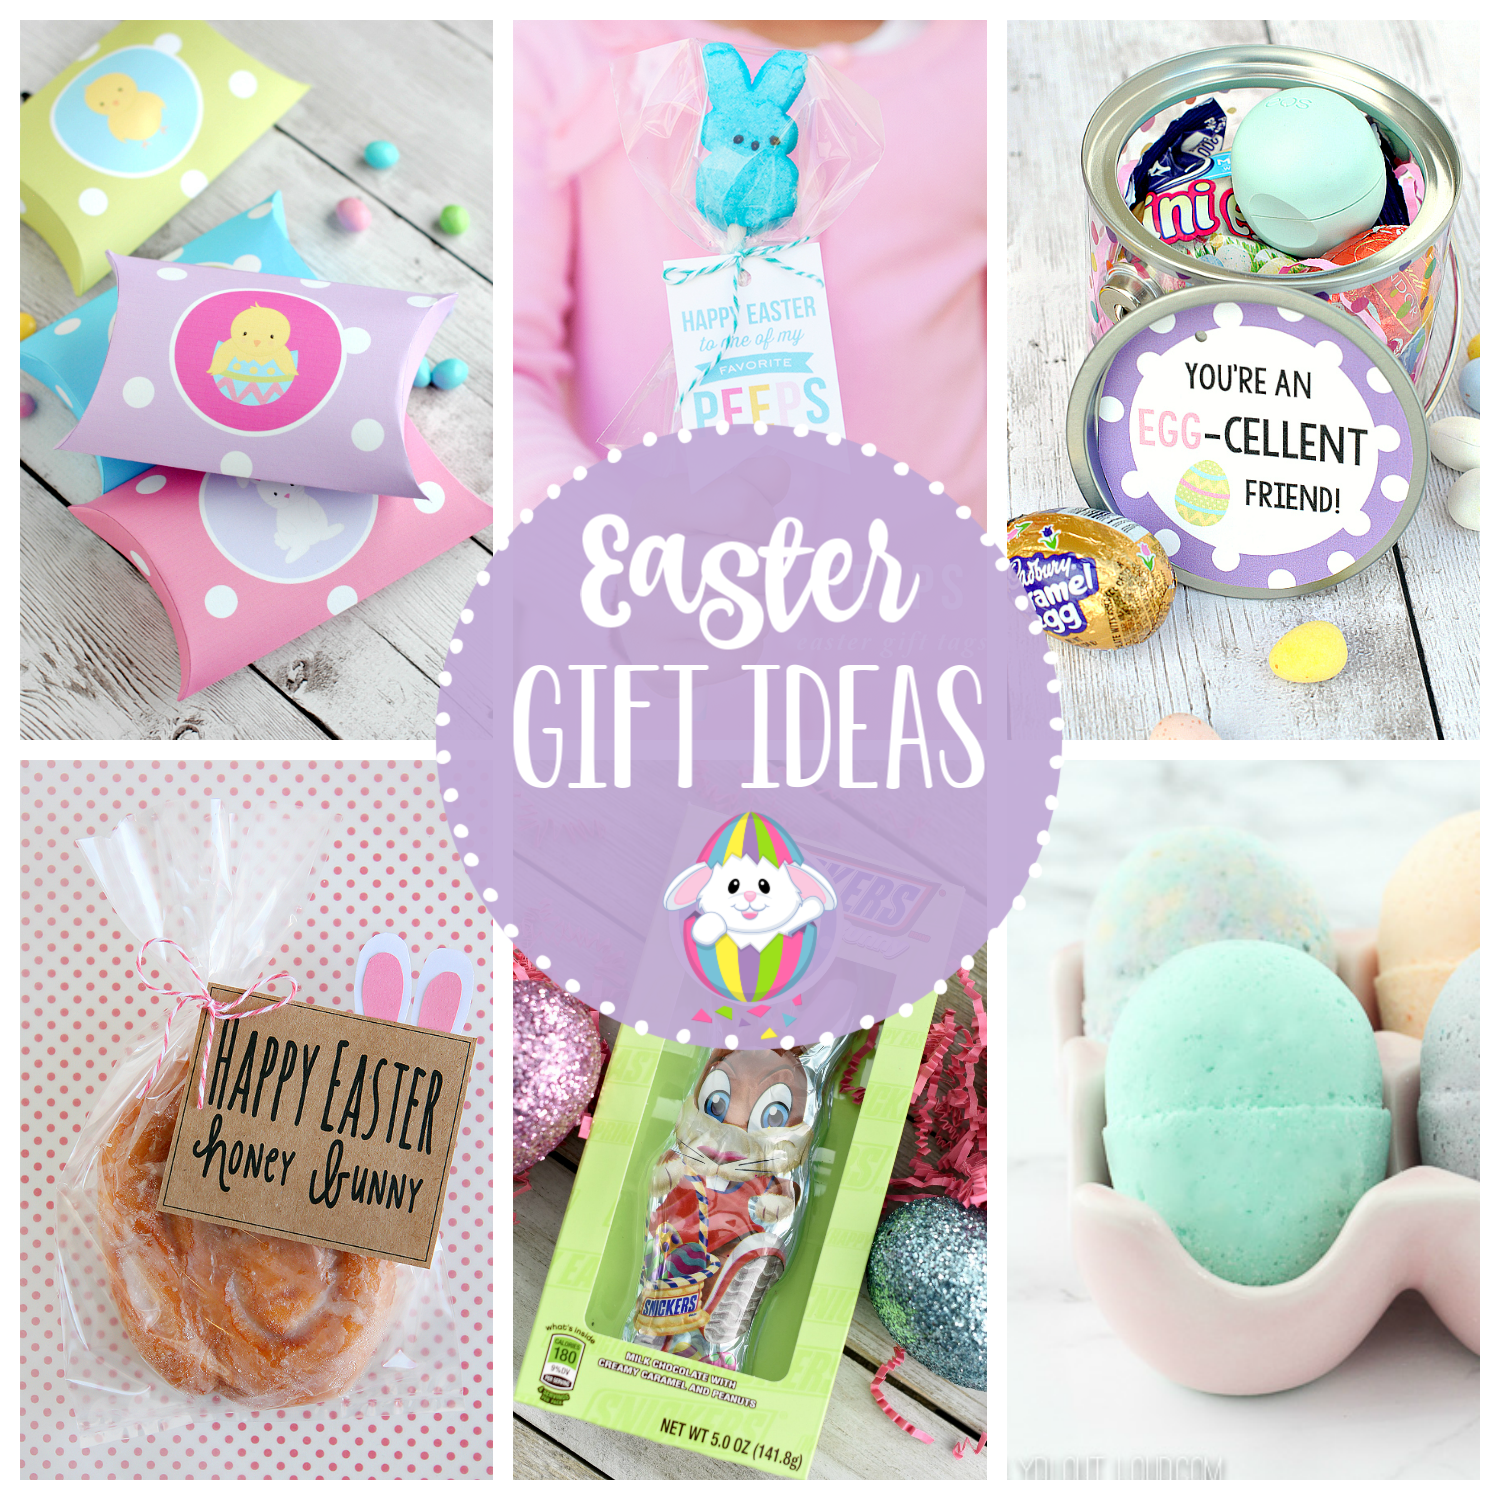 Easter Gifts for Friends